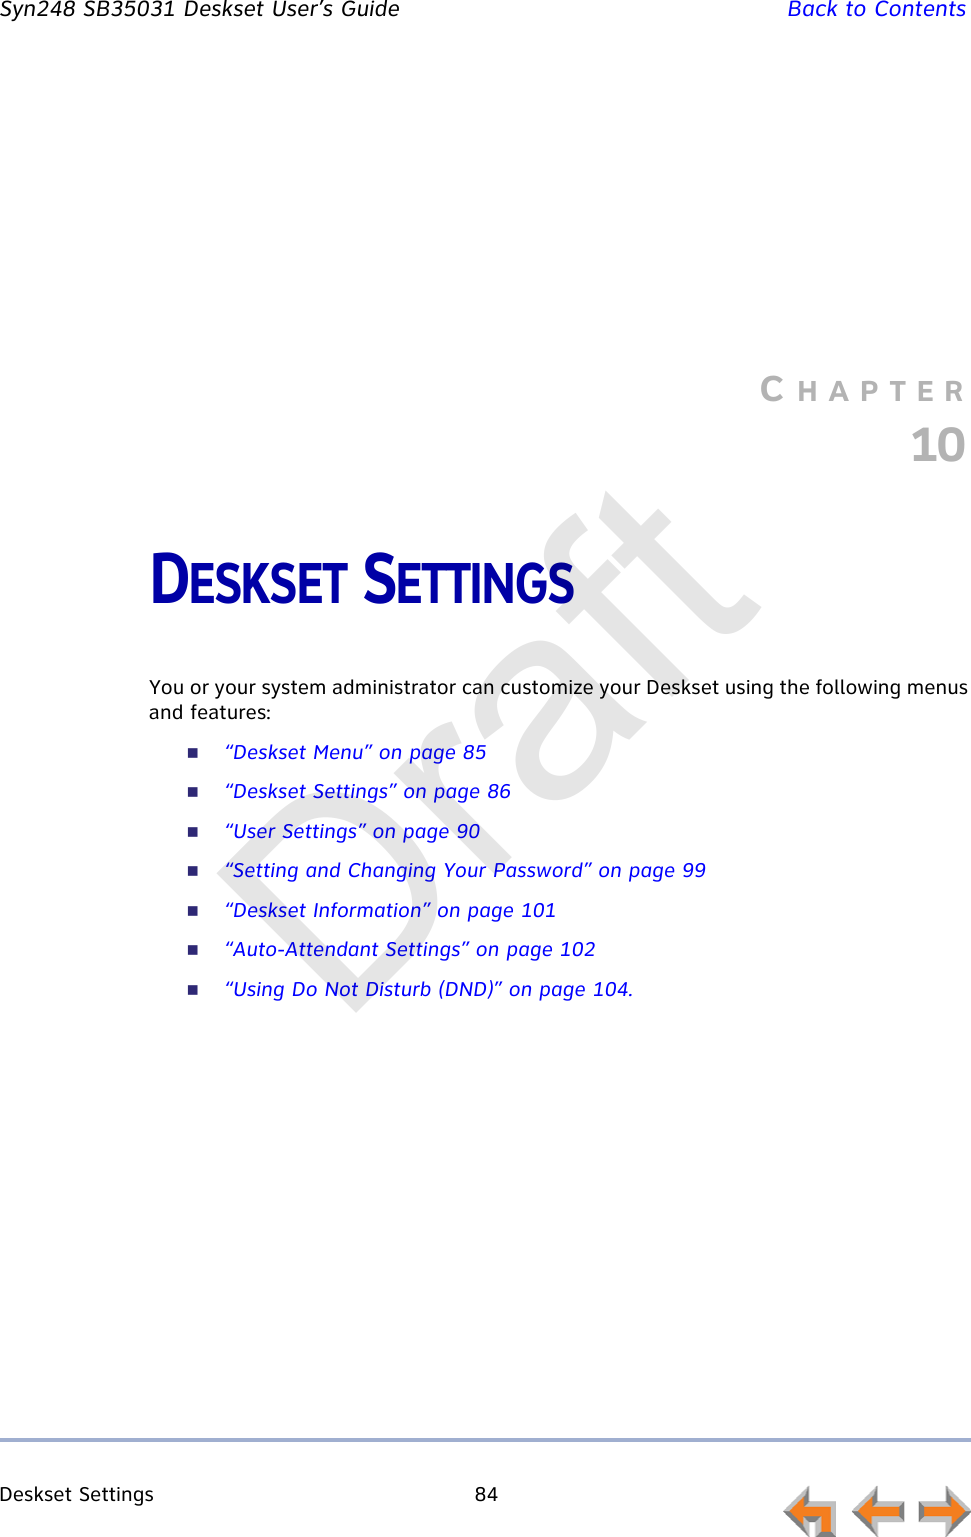 Deskset Settings 84         Syn248 SB35031 Deskset User’s Guide Back to ContentsCHAPTER10DESKSET SETTINGSYou or your system administrator can customize your Deskset using the following menus and features:“Deskset Menu” on page 85“Deskset Settings” on page 86“User Settings” on page 90“Setting and Changing Your Password” on page 99“Deskset Information” on page 101“Auto-Attendant Settings” on page 102“Using Do Not Disturb (DND)” on page 104.Draft